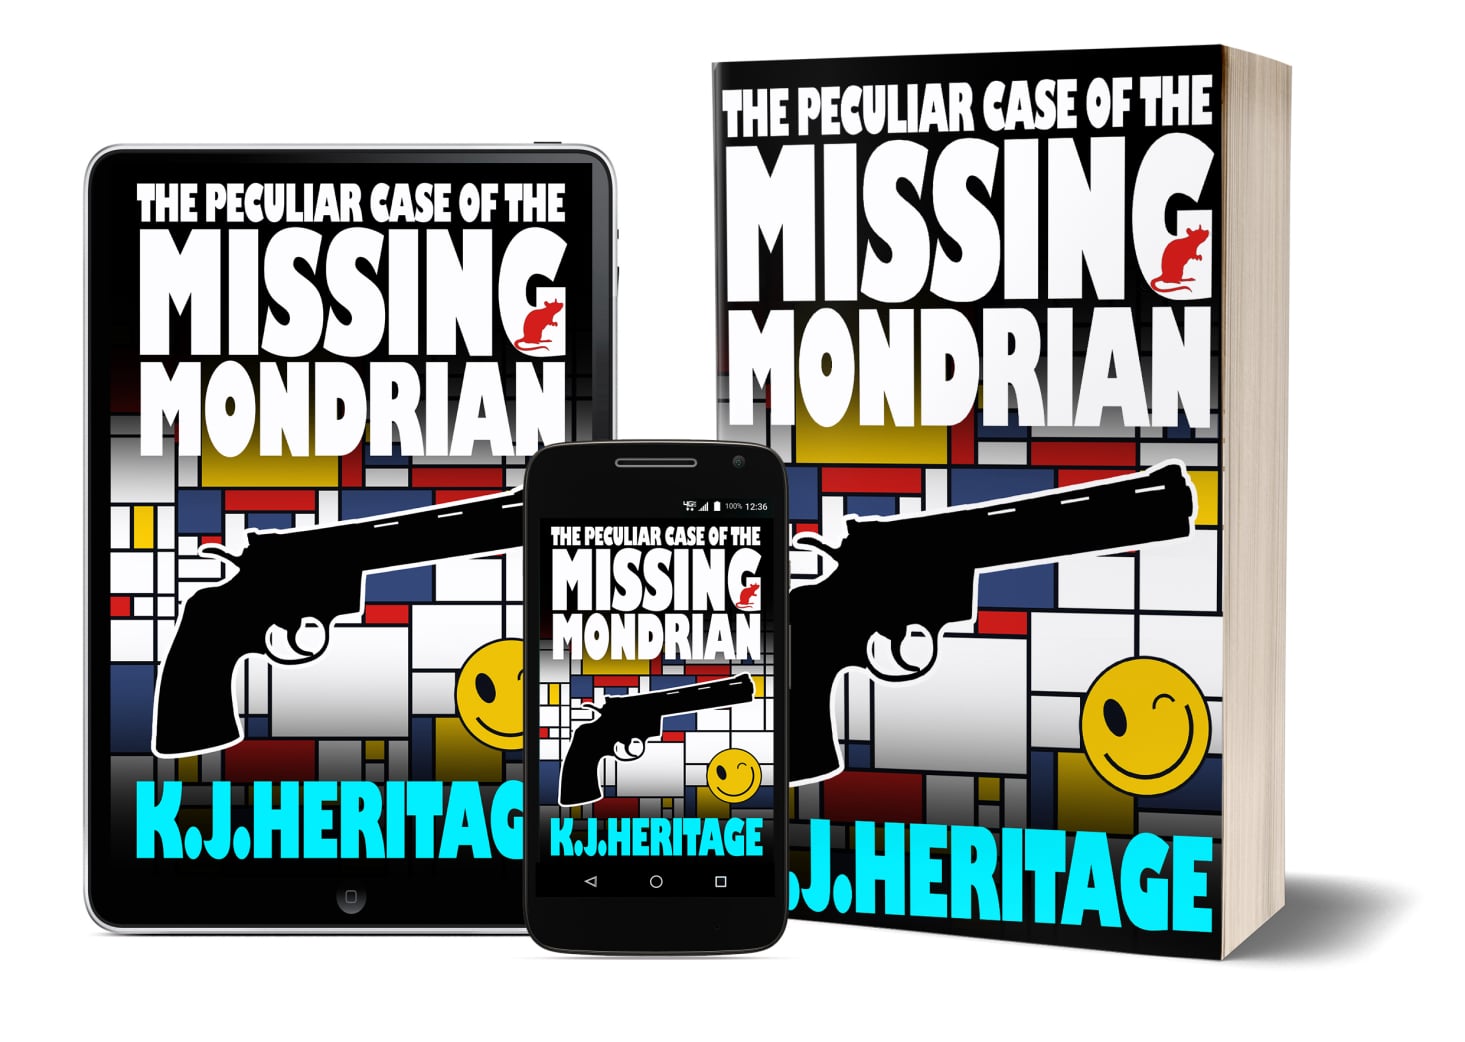 The Case of the Missing Mondrian by K.J.Heritage